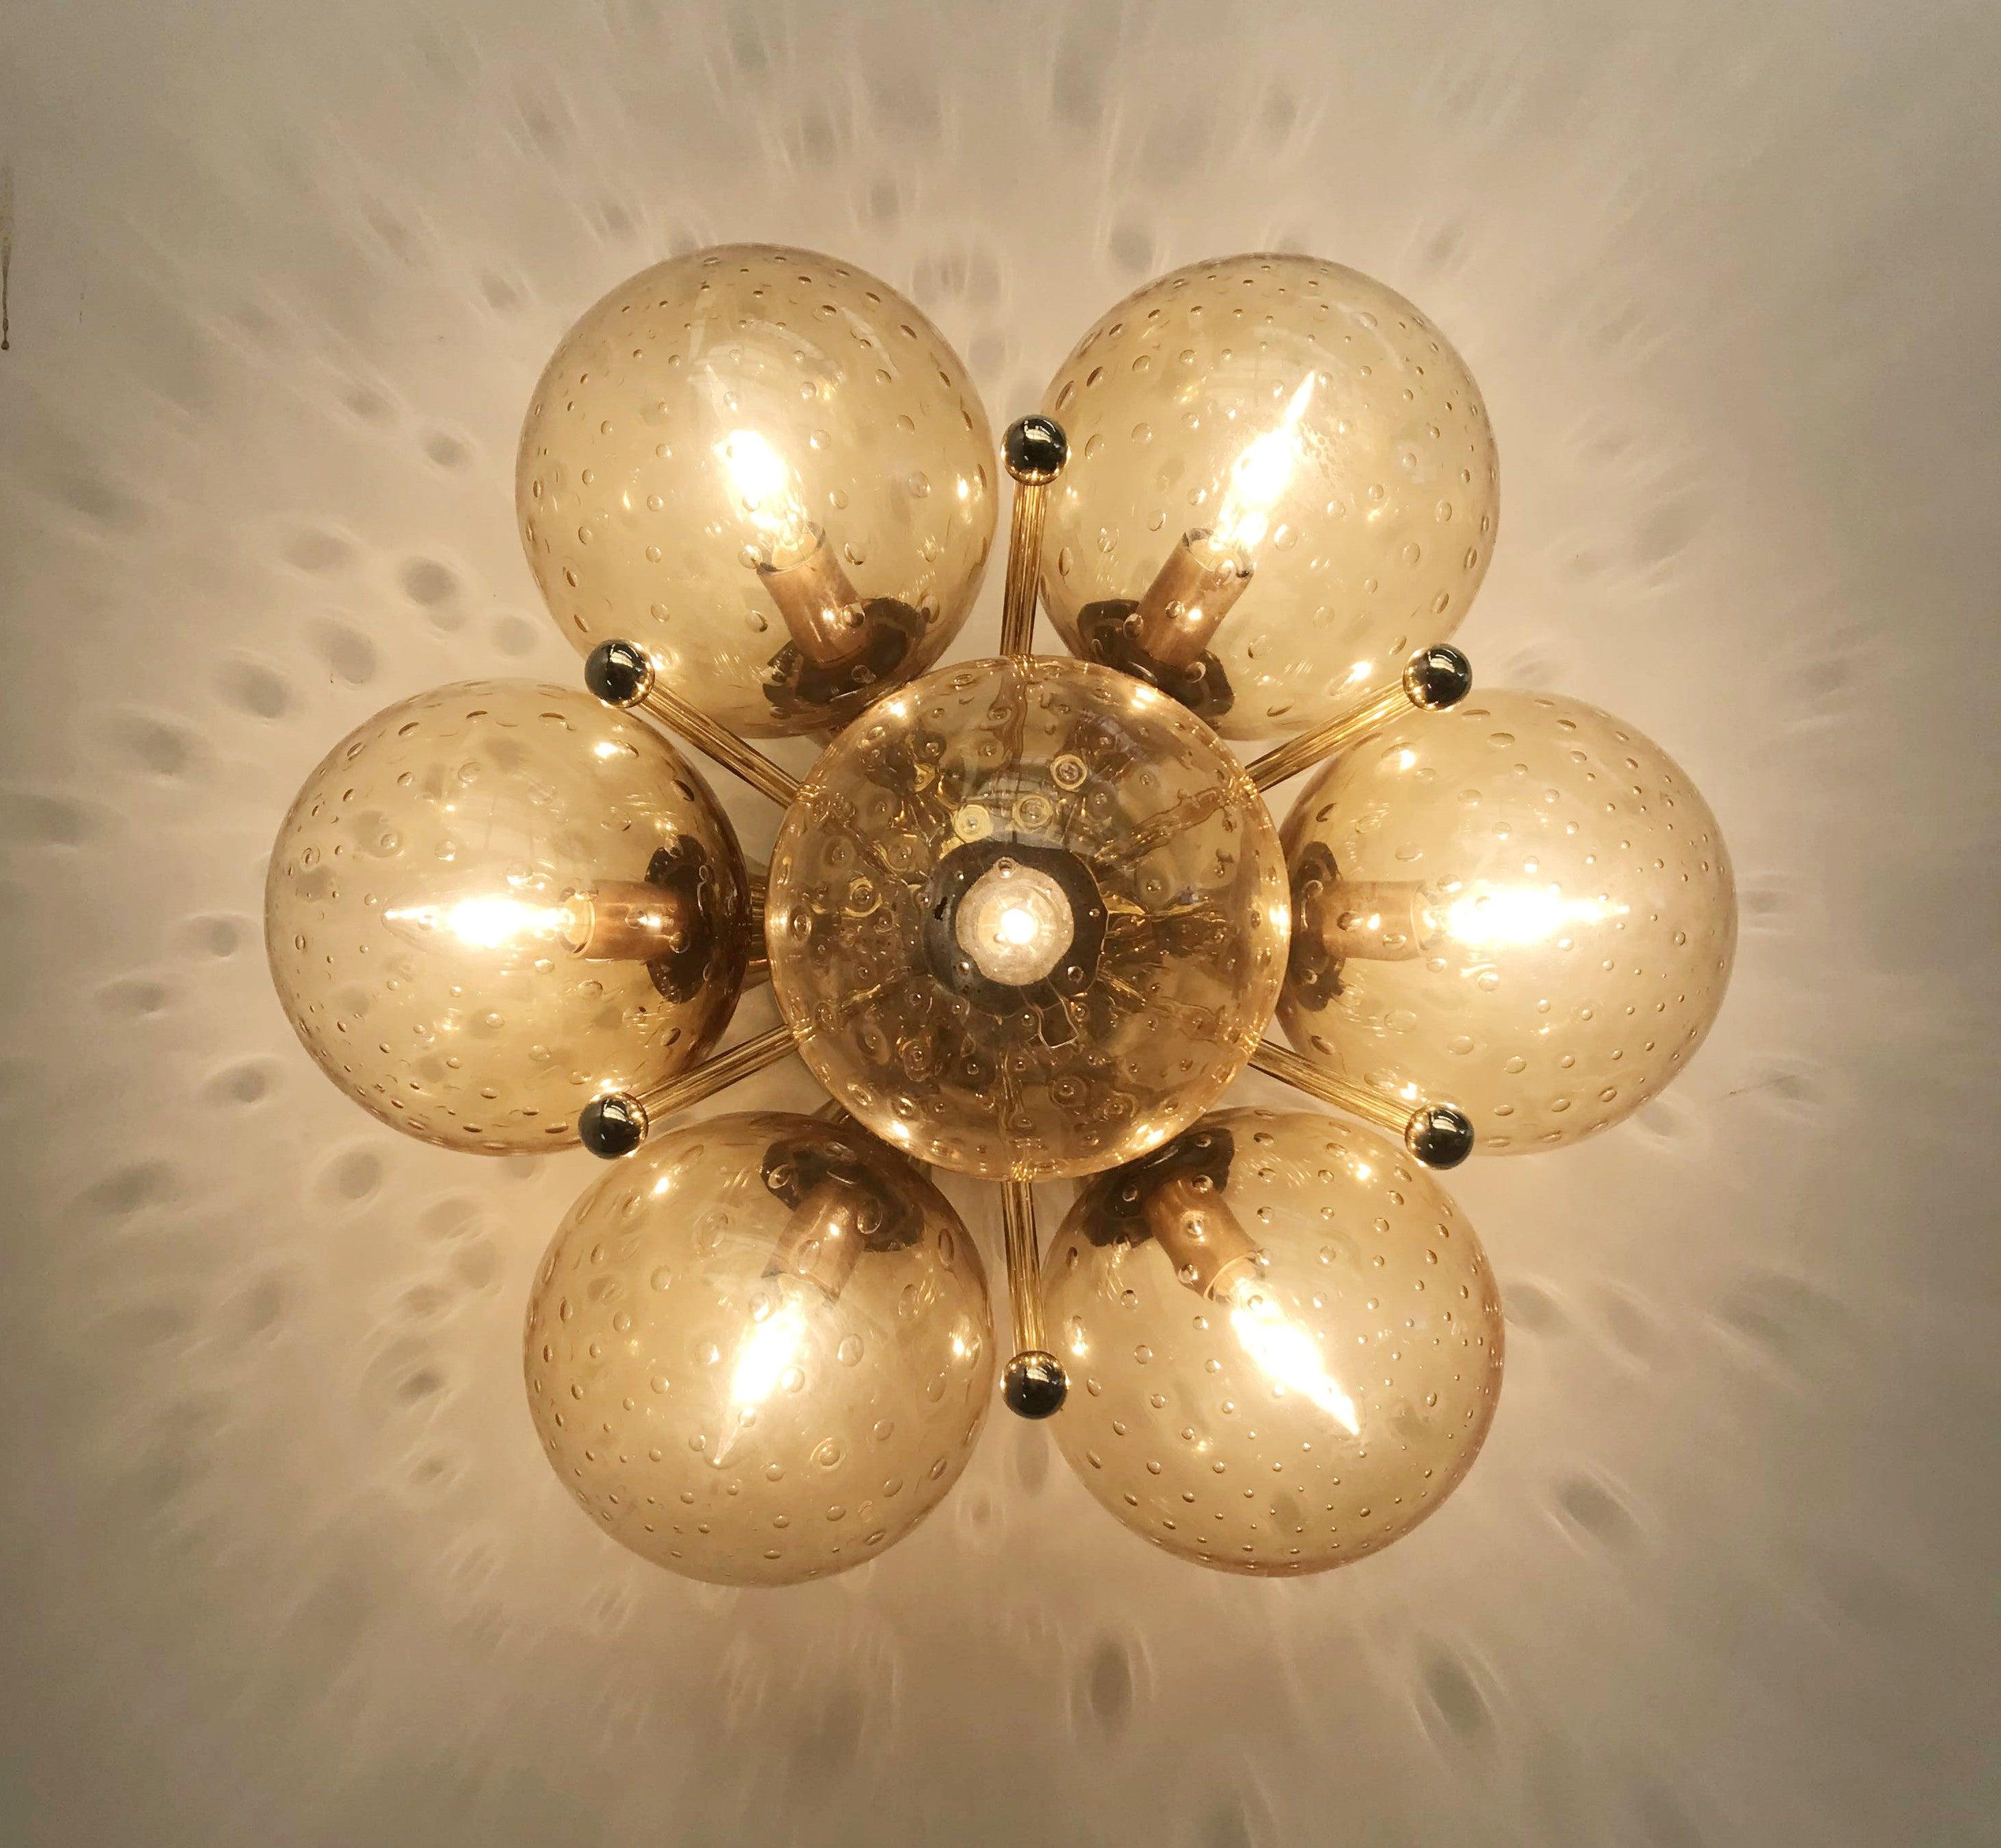 Italian flush mount with Murano glass globes mounted on solid brass frame
Designed by Fabio Bergomi / Made in Italy
7 lights / E12 or E14 type / max 40W each
Diameter: 22 inches / Height: 11 inches
Order only / This item ships from Italy
Order